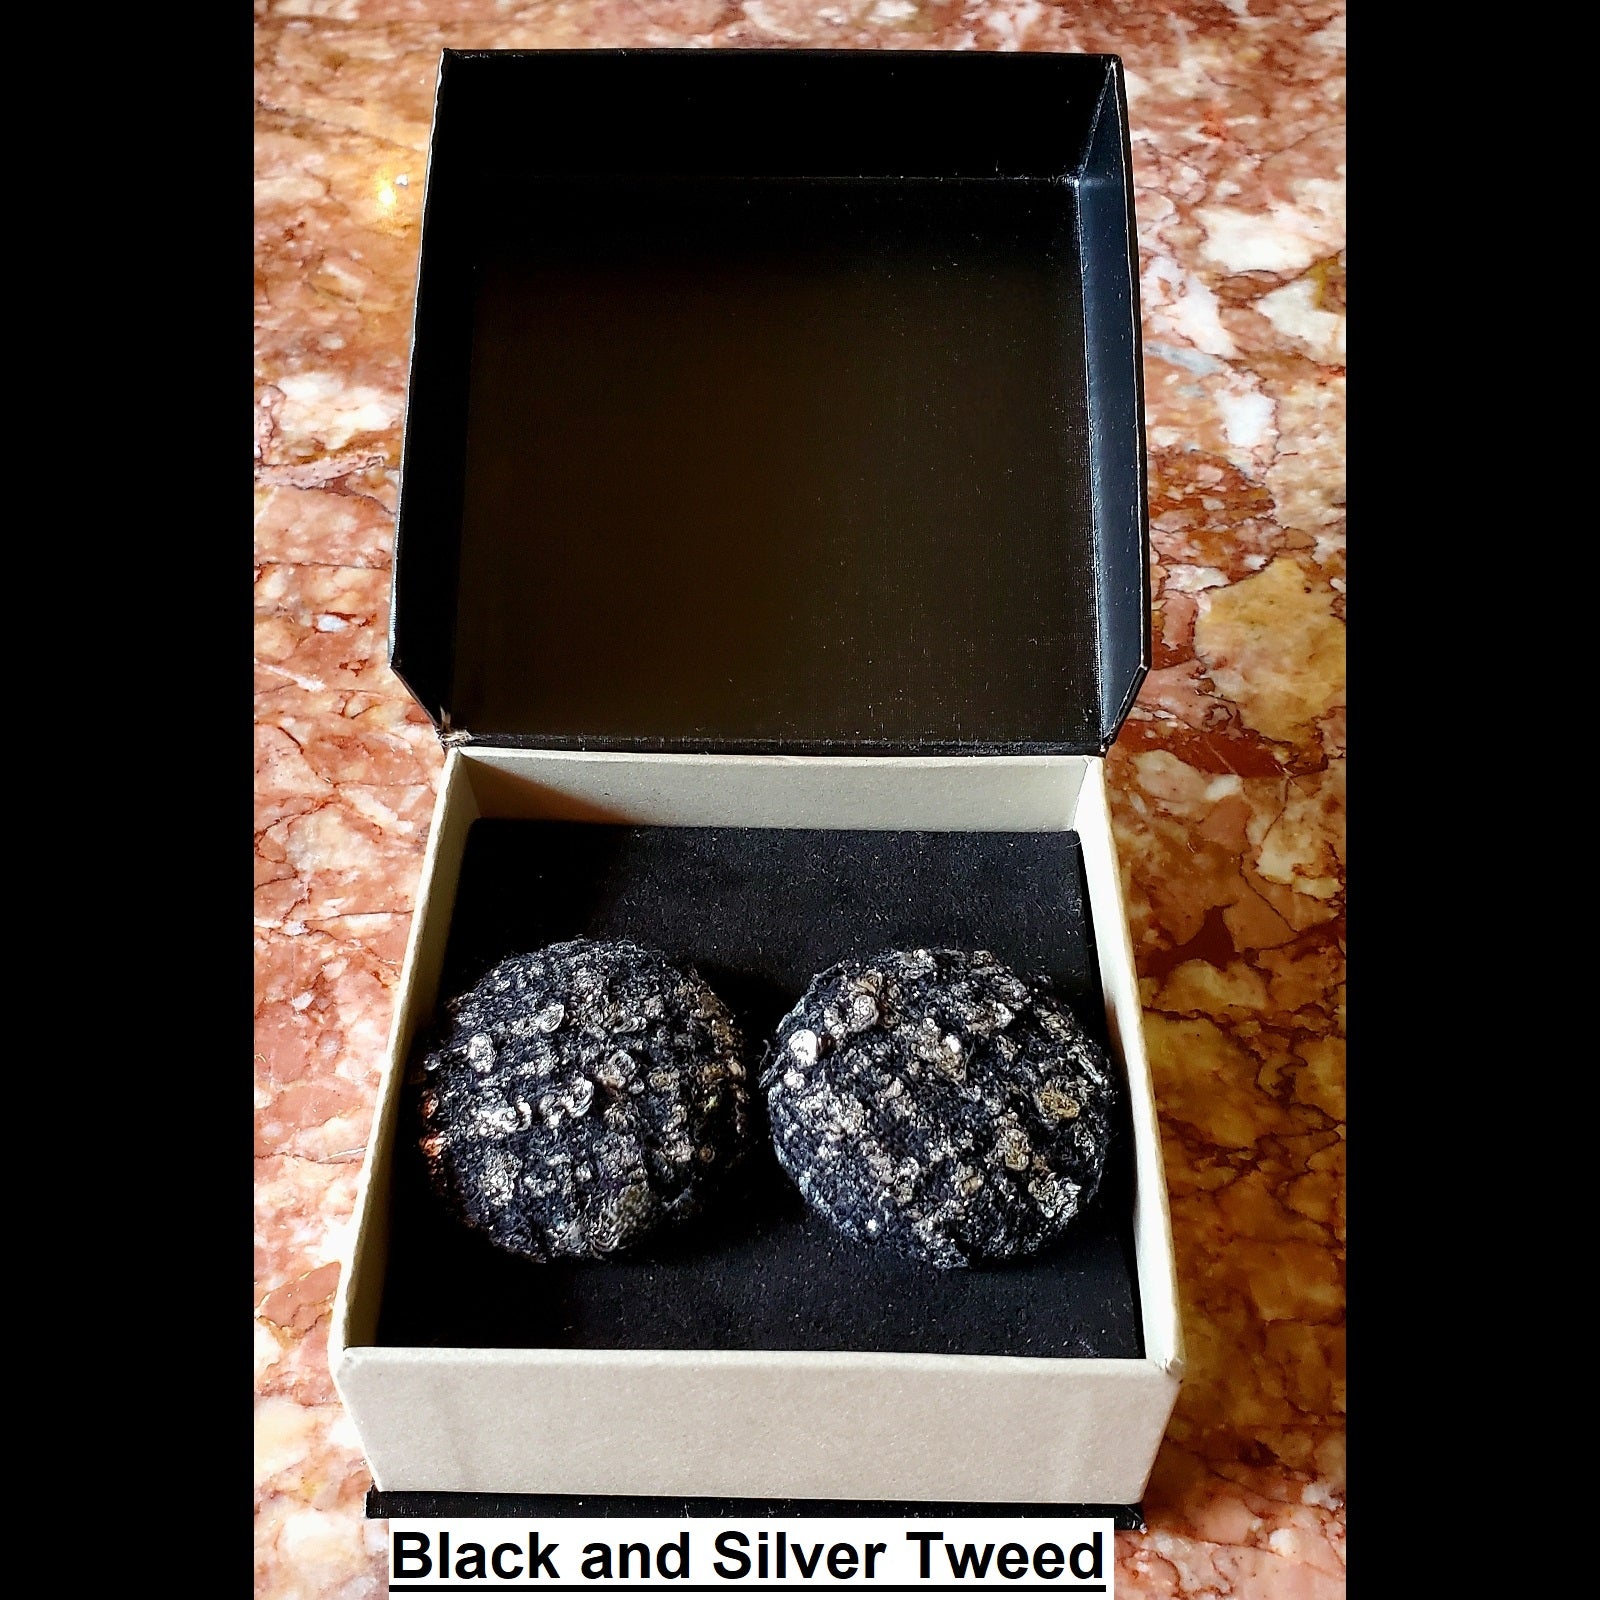 Black and silver tweed print button earrings in jewelry box